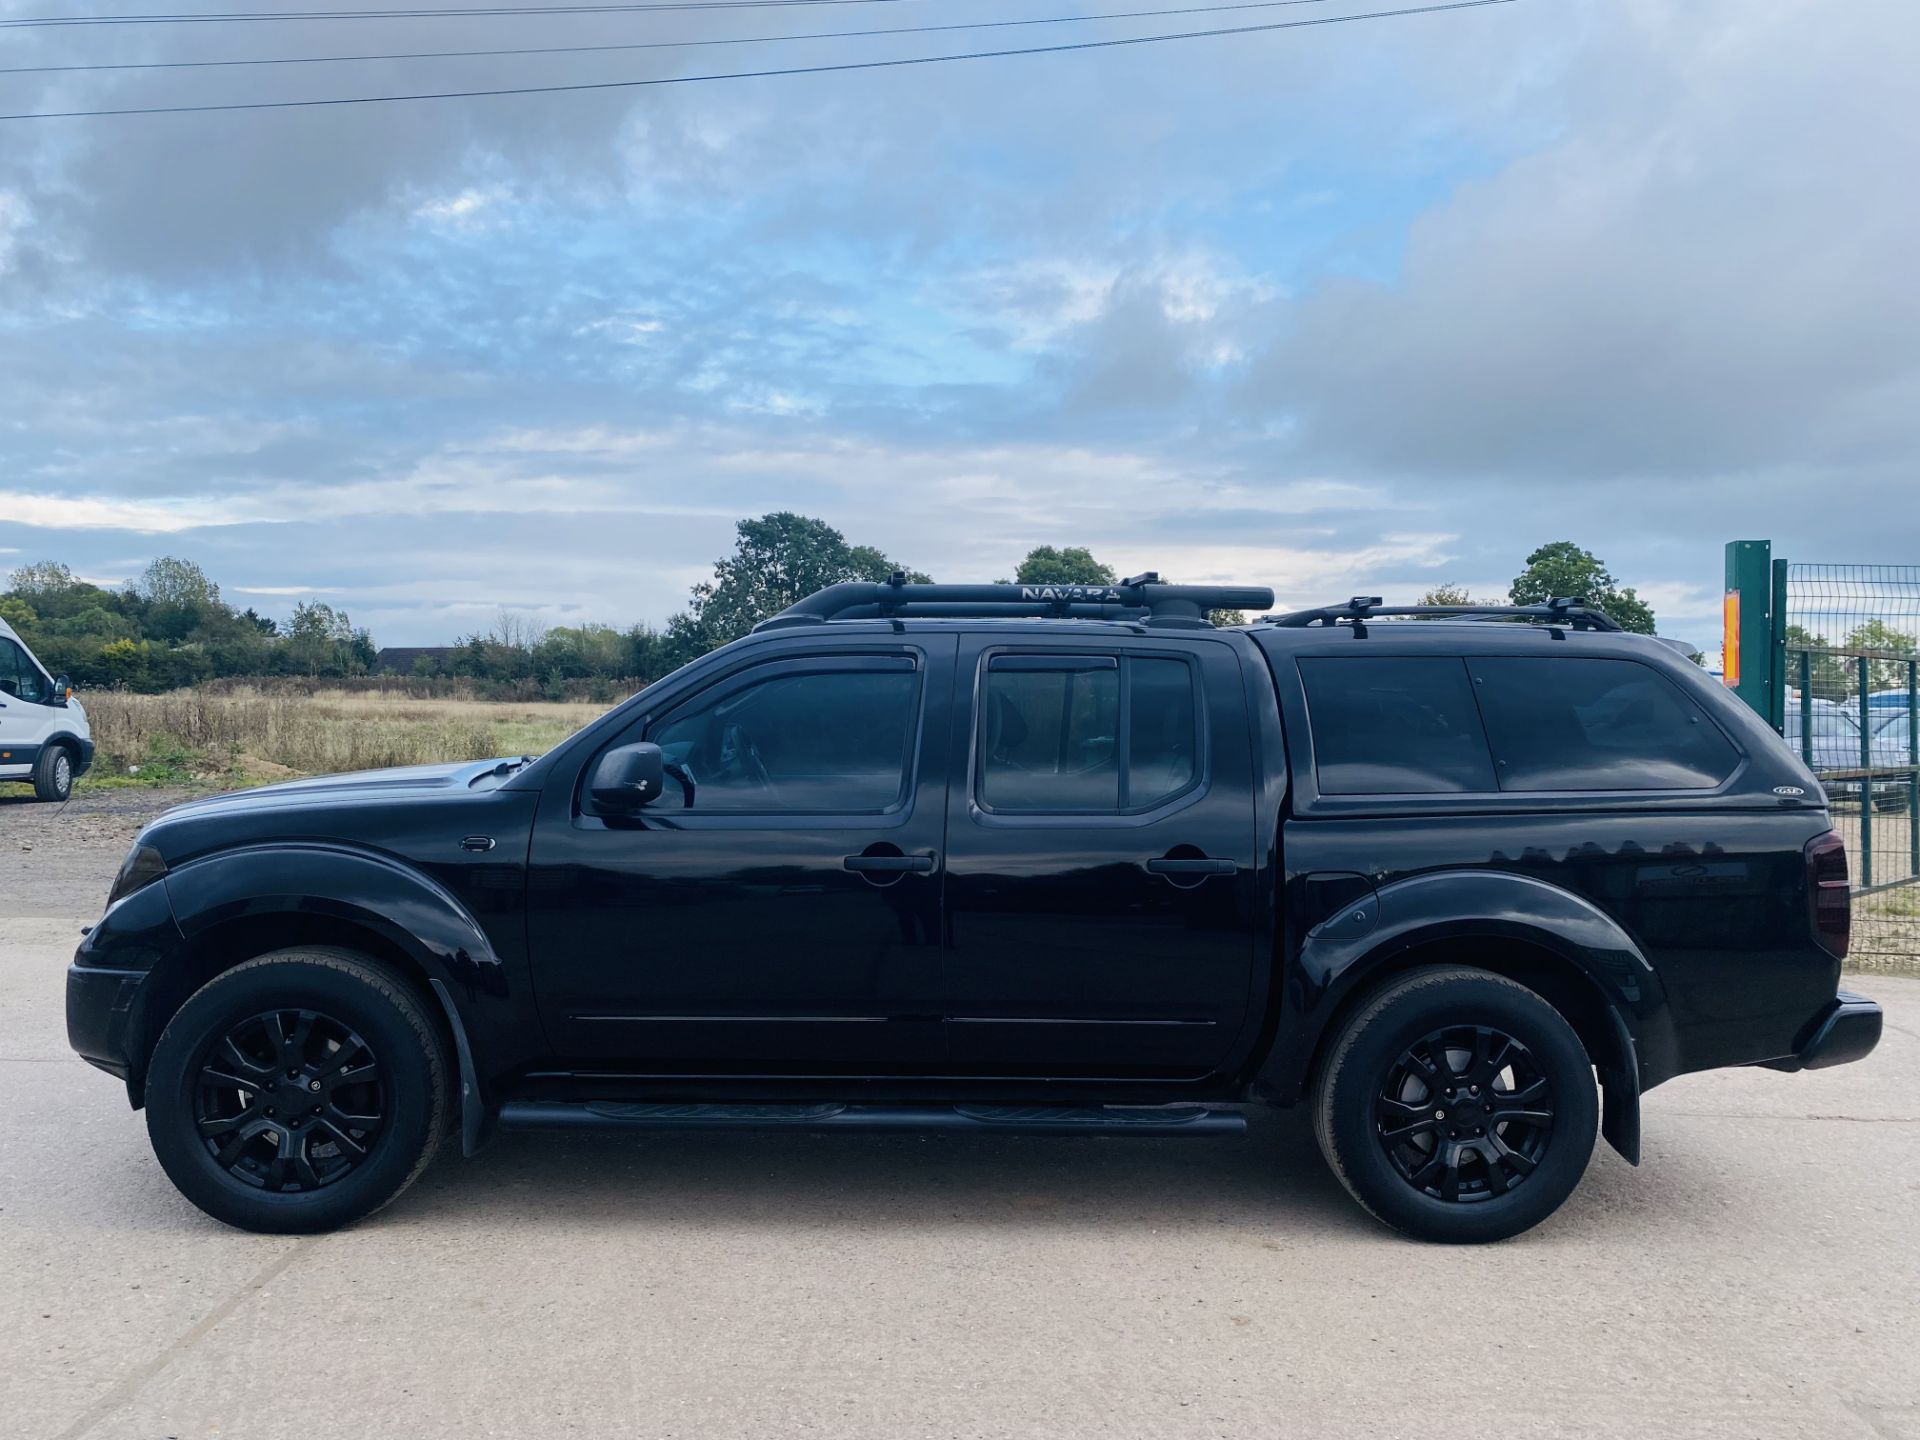 ON SALE NISSAN NAVARA DCI 2.5 "OUTLAW" AUTOMATIC D/CAB "BLACK EDITION" 172BHP!! - NEW SHAPE - NO VAT - Image 5 of 15